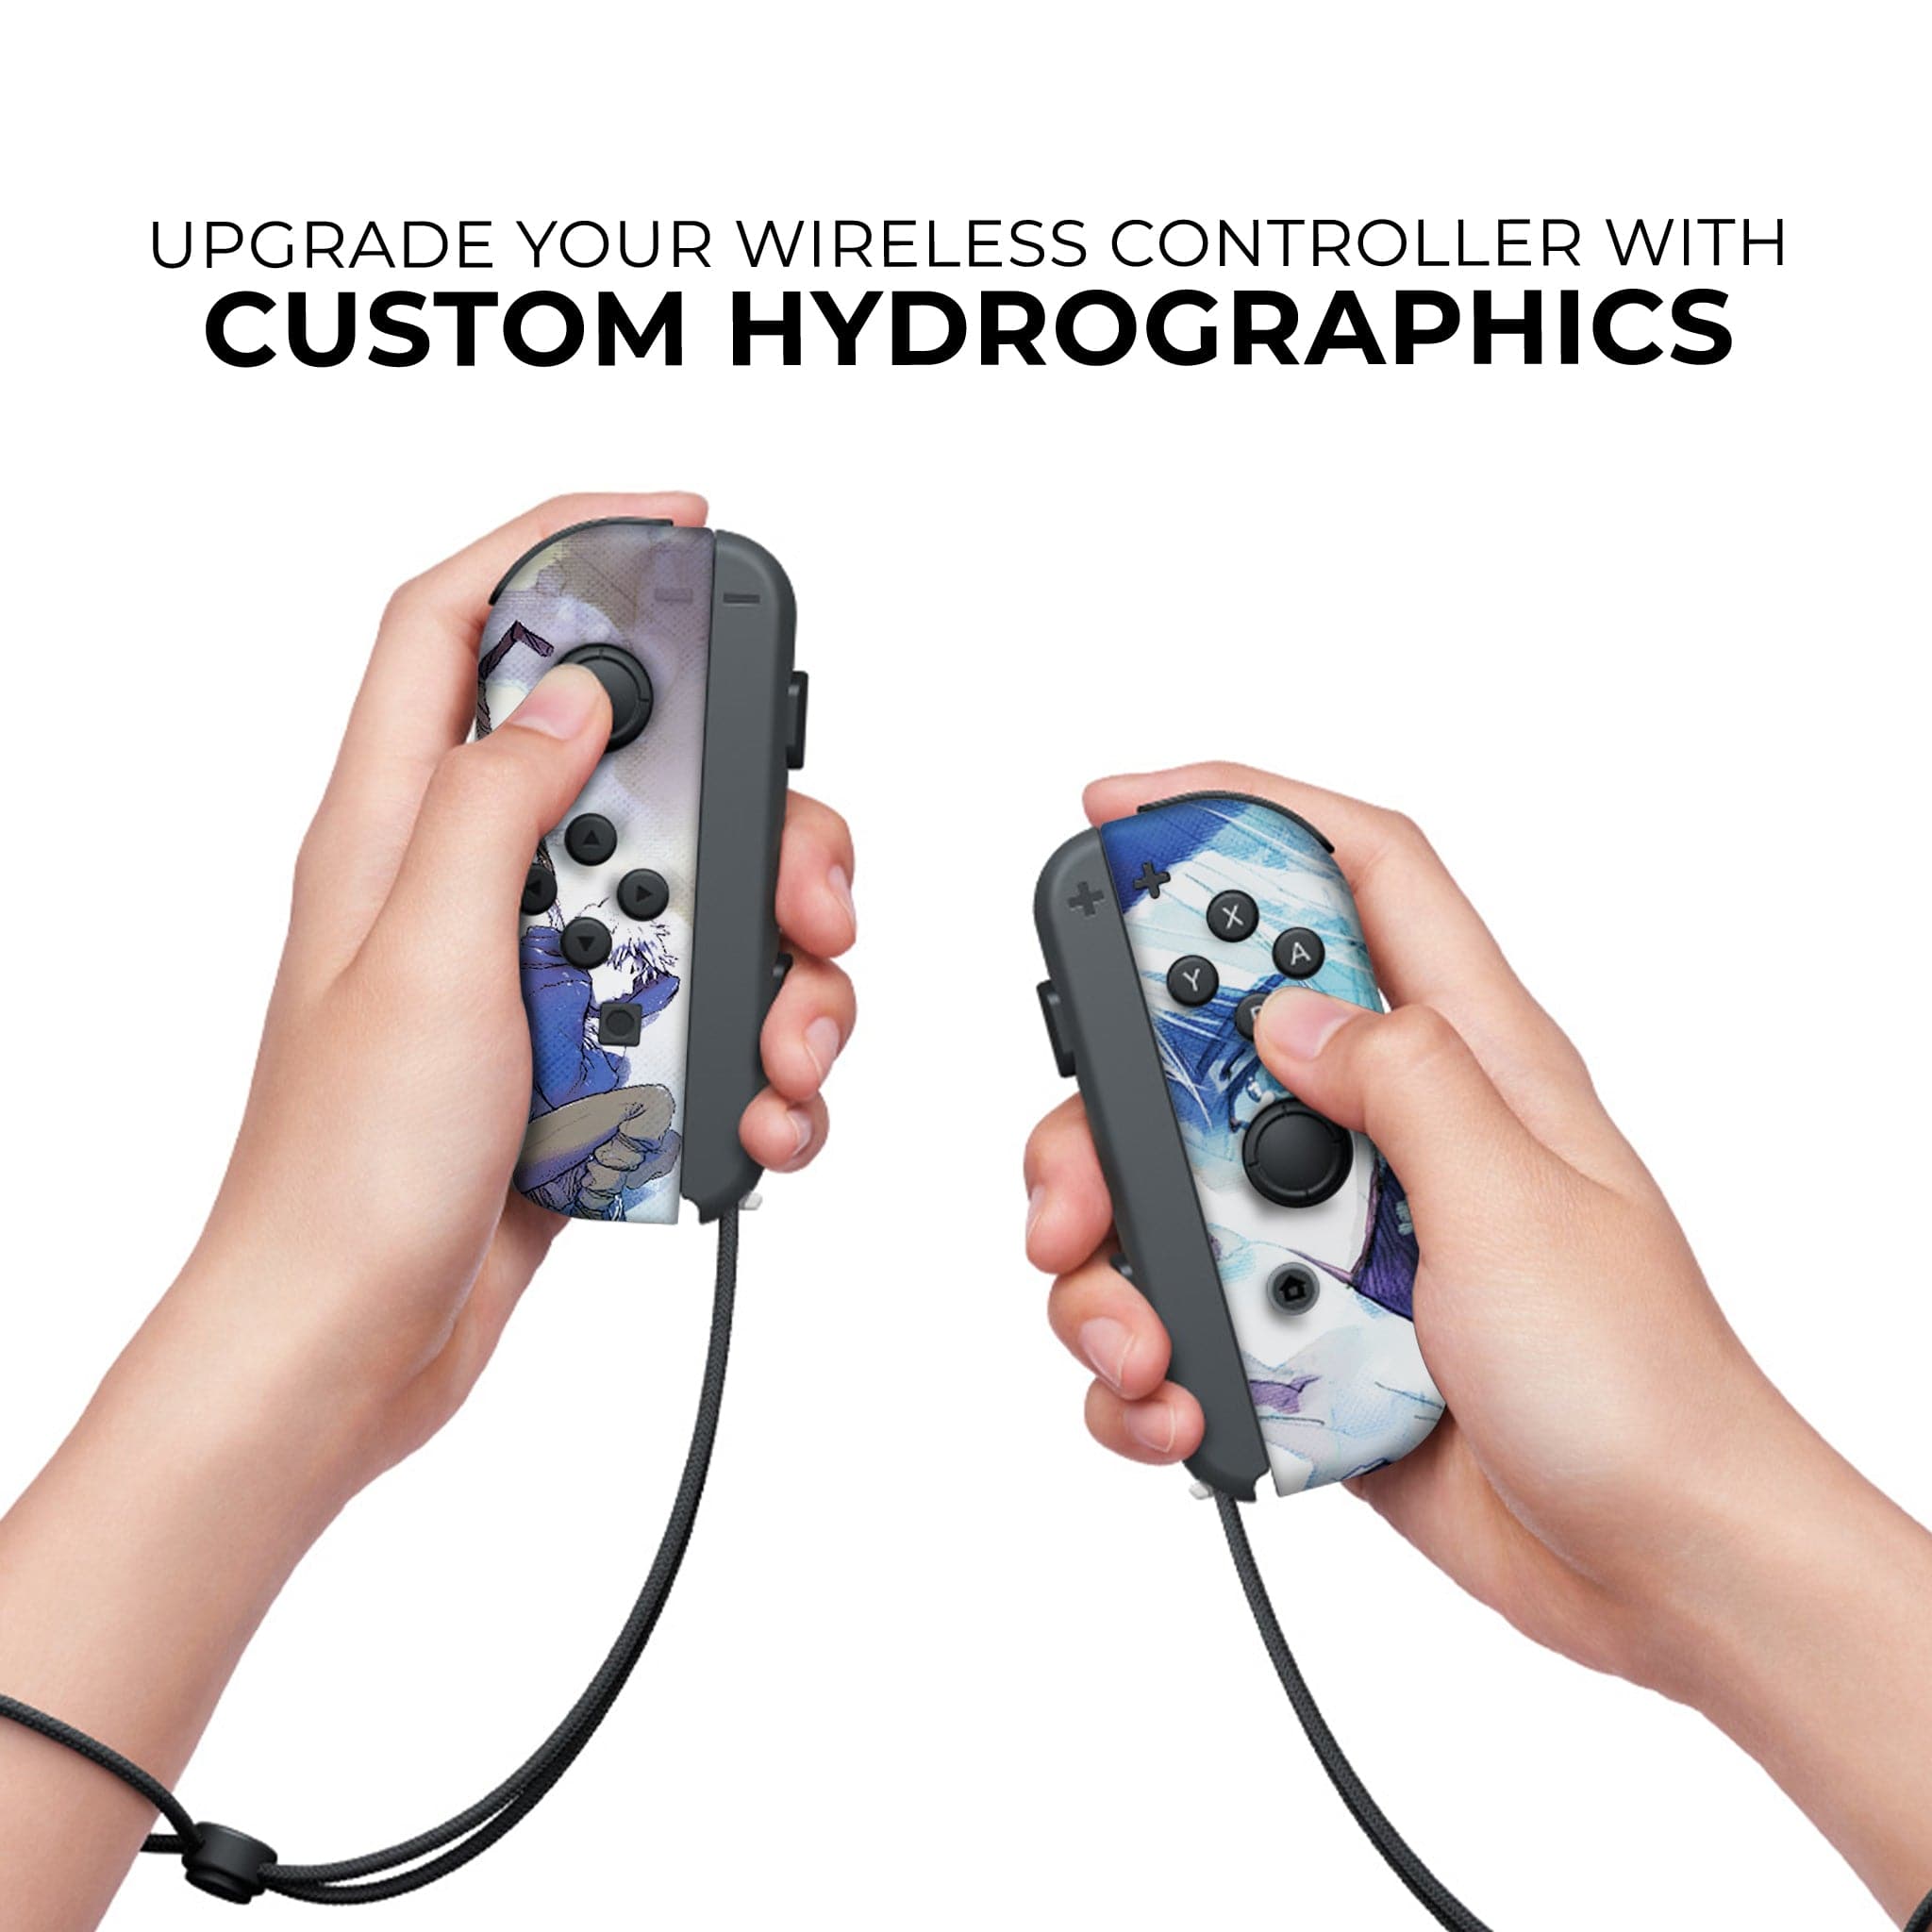 Jack Frost Joy-Con Left and Right Switch Controllers by Nintendo